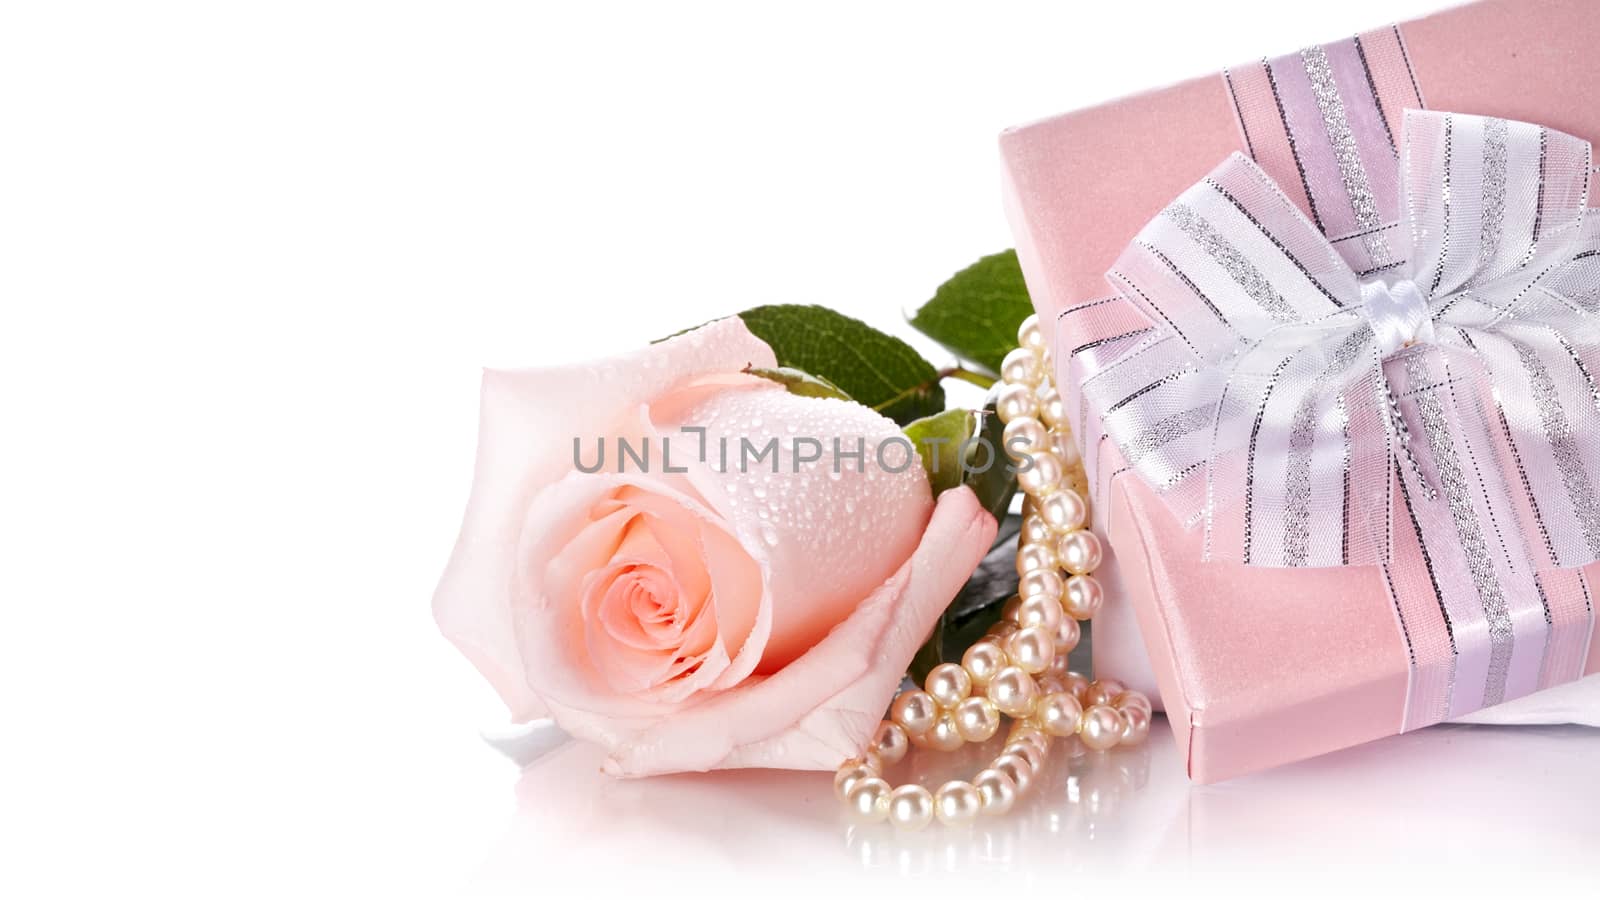 Pink rose. Rose on a white background. Pink flower. Pink rose and pearl beads. Gift and rose.